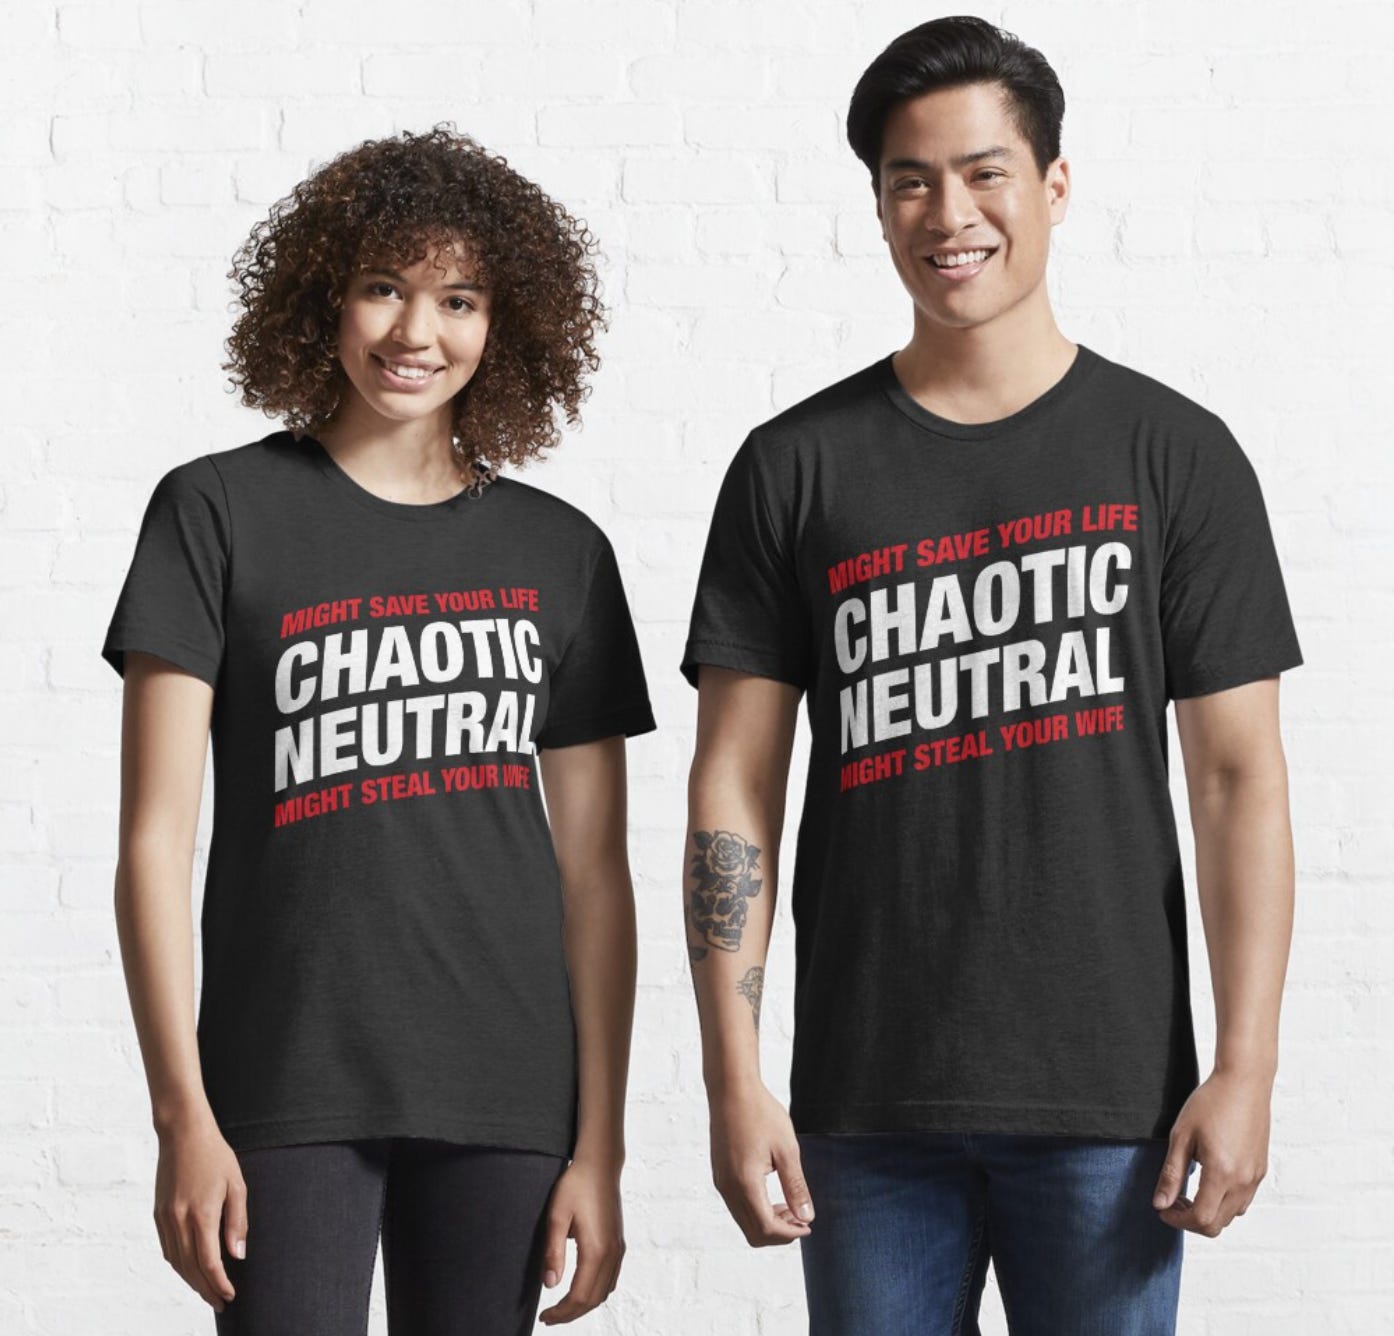 T-Shirt that reads: "Chaotic Neutral: Might save your life, might steal your wife"